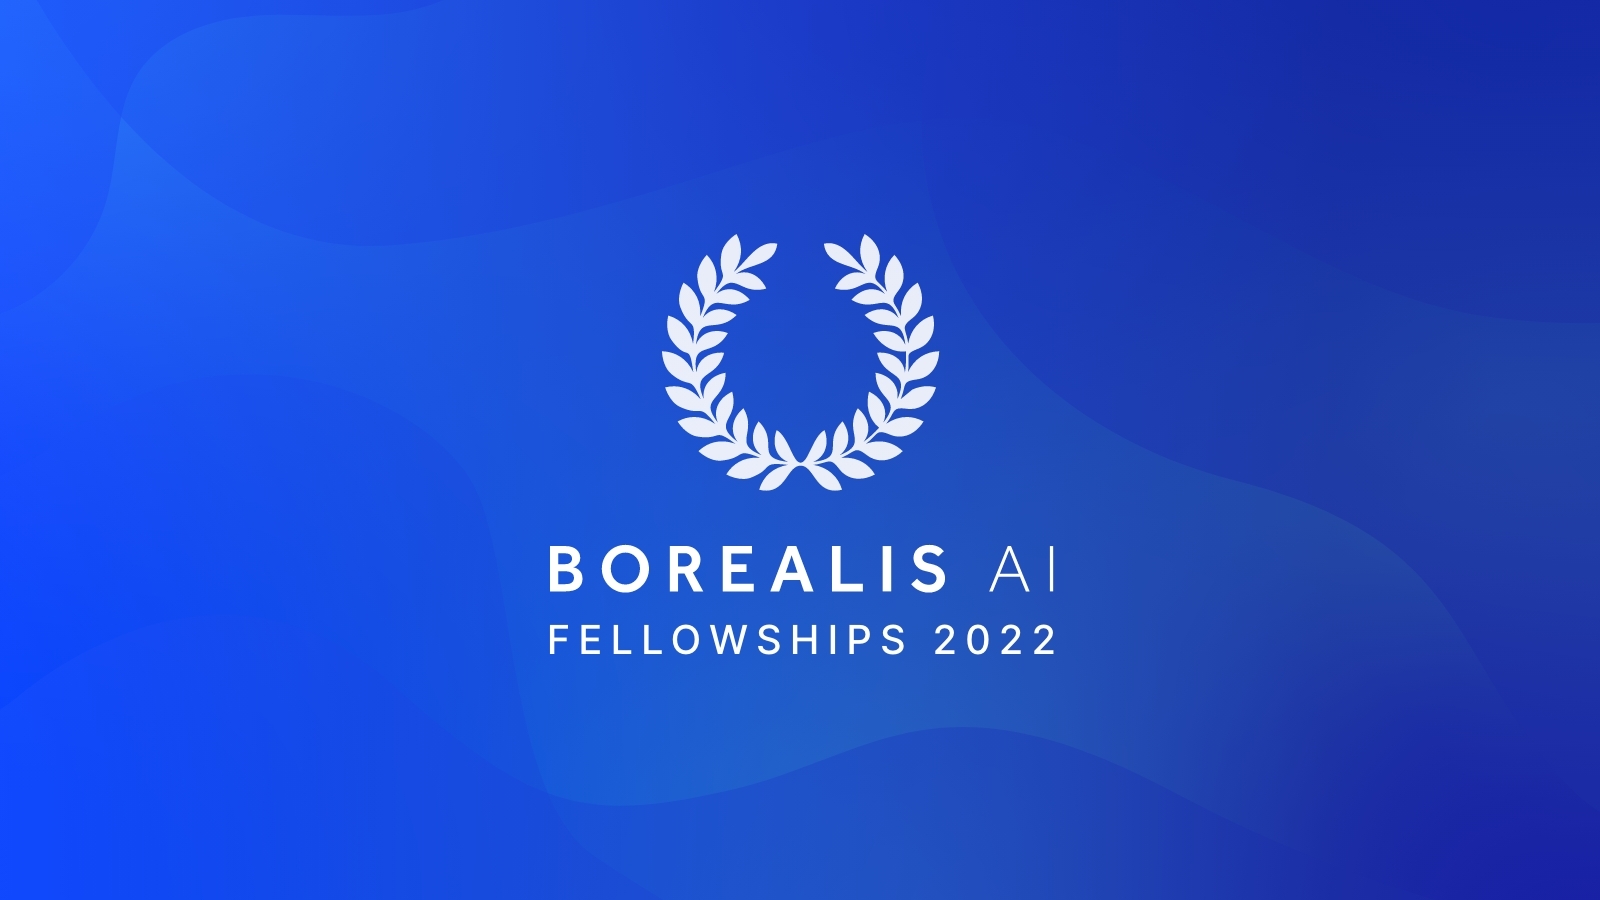 Featured image of "Borealis AI Fellowships 2022" announcement